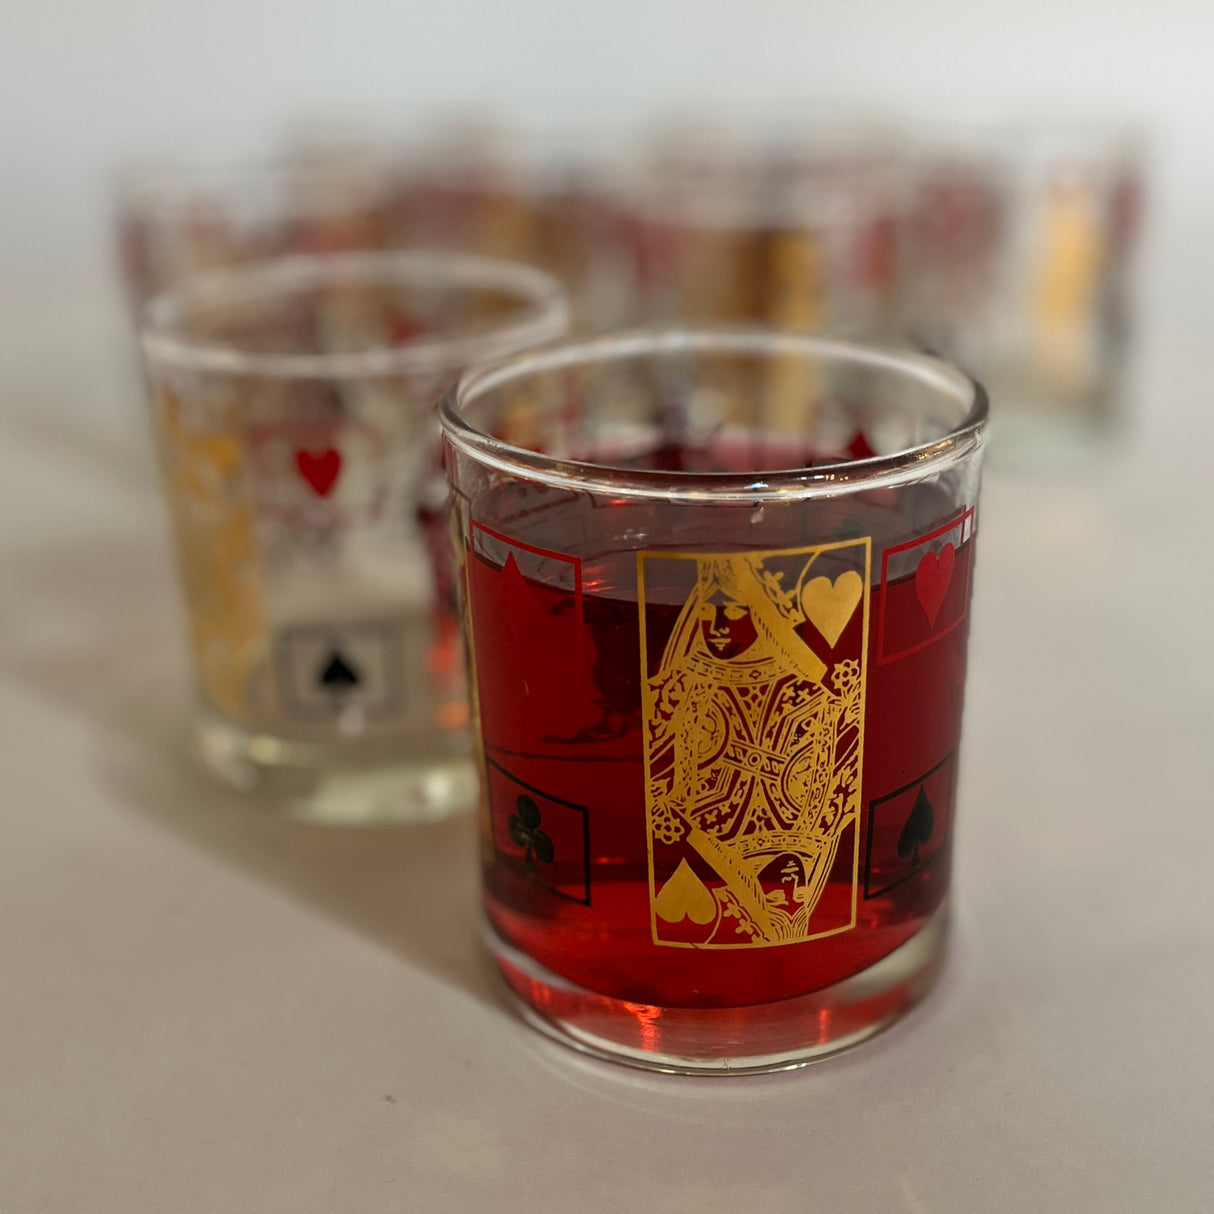 Double Old Fashion Card-Themed Vintage Drinks Glasses with Shaker, Set of 9